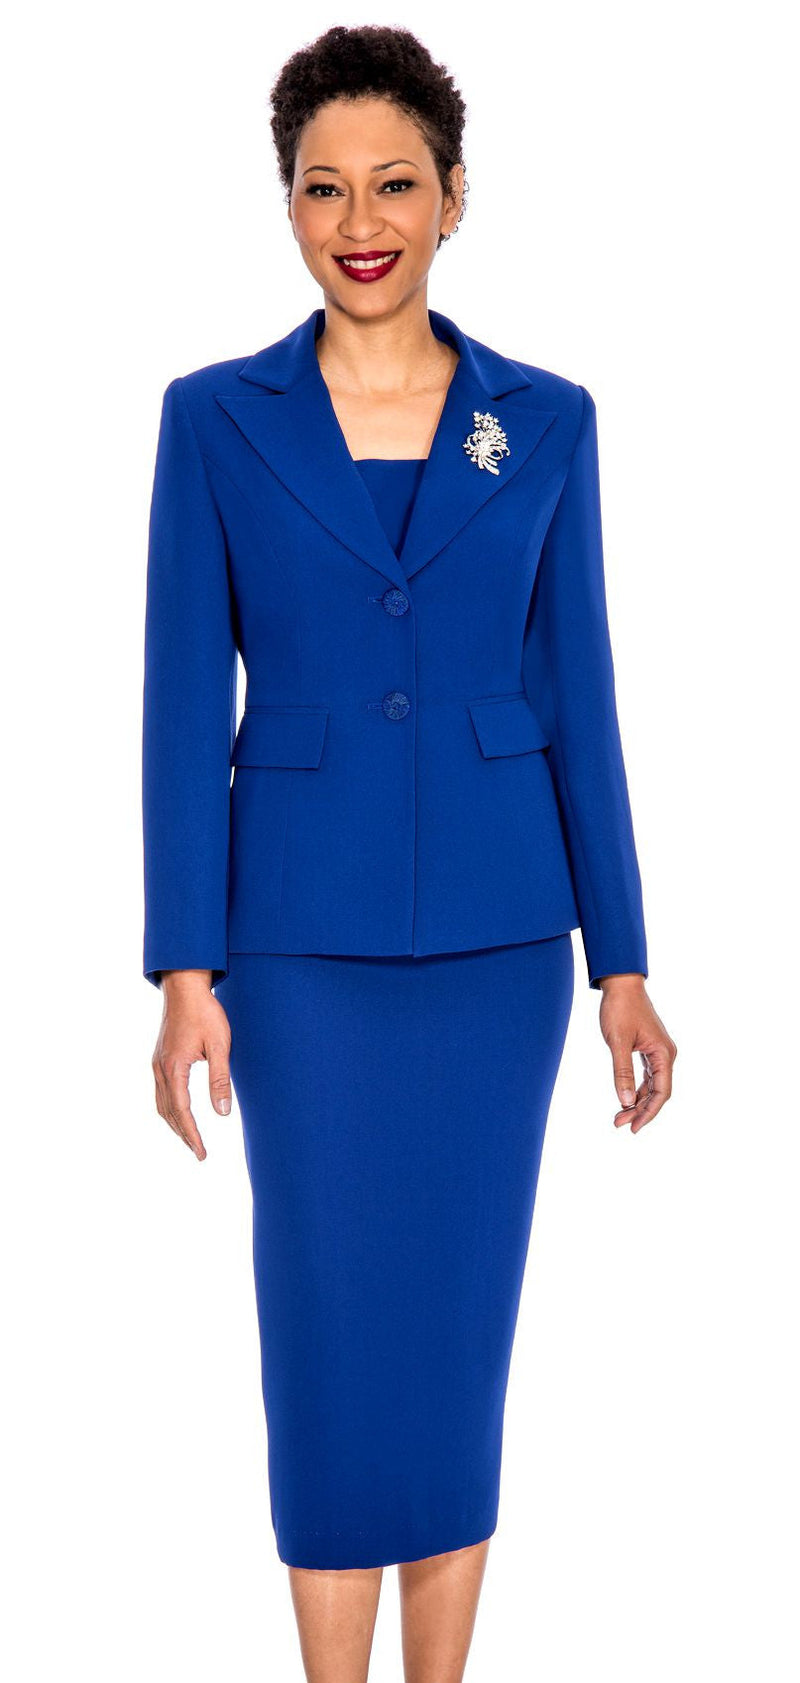 Giovanna Usher Suit 0710-Royal Blue - Church Suits For Less